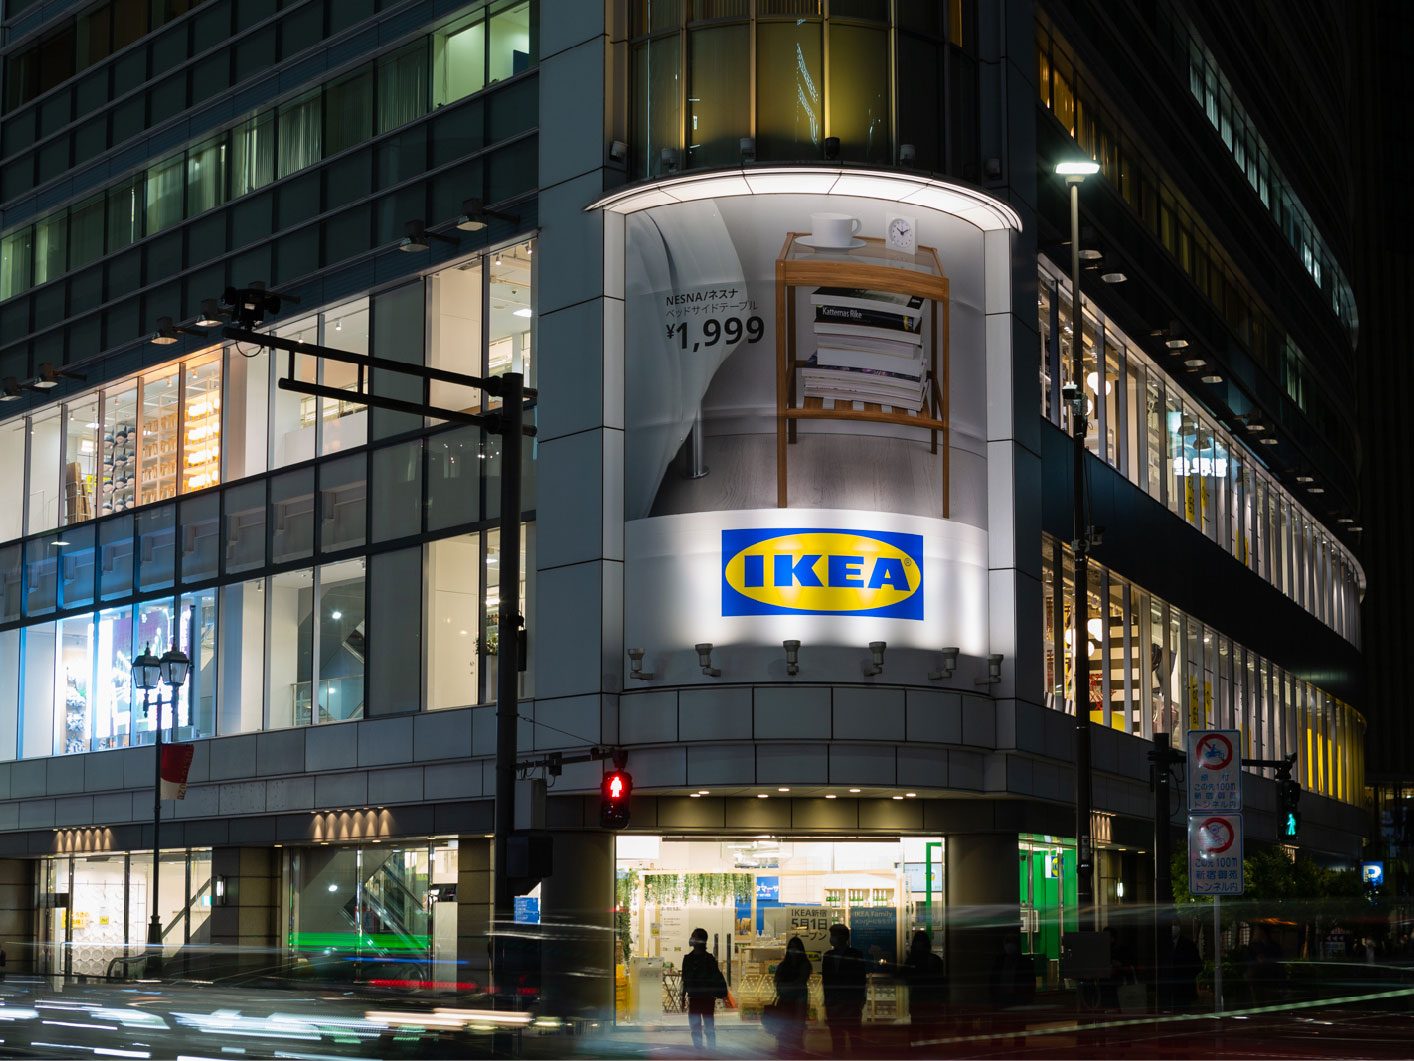 City block dominated by white store facade with large display windows and an IKEA sign in yellow and blue.